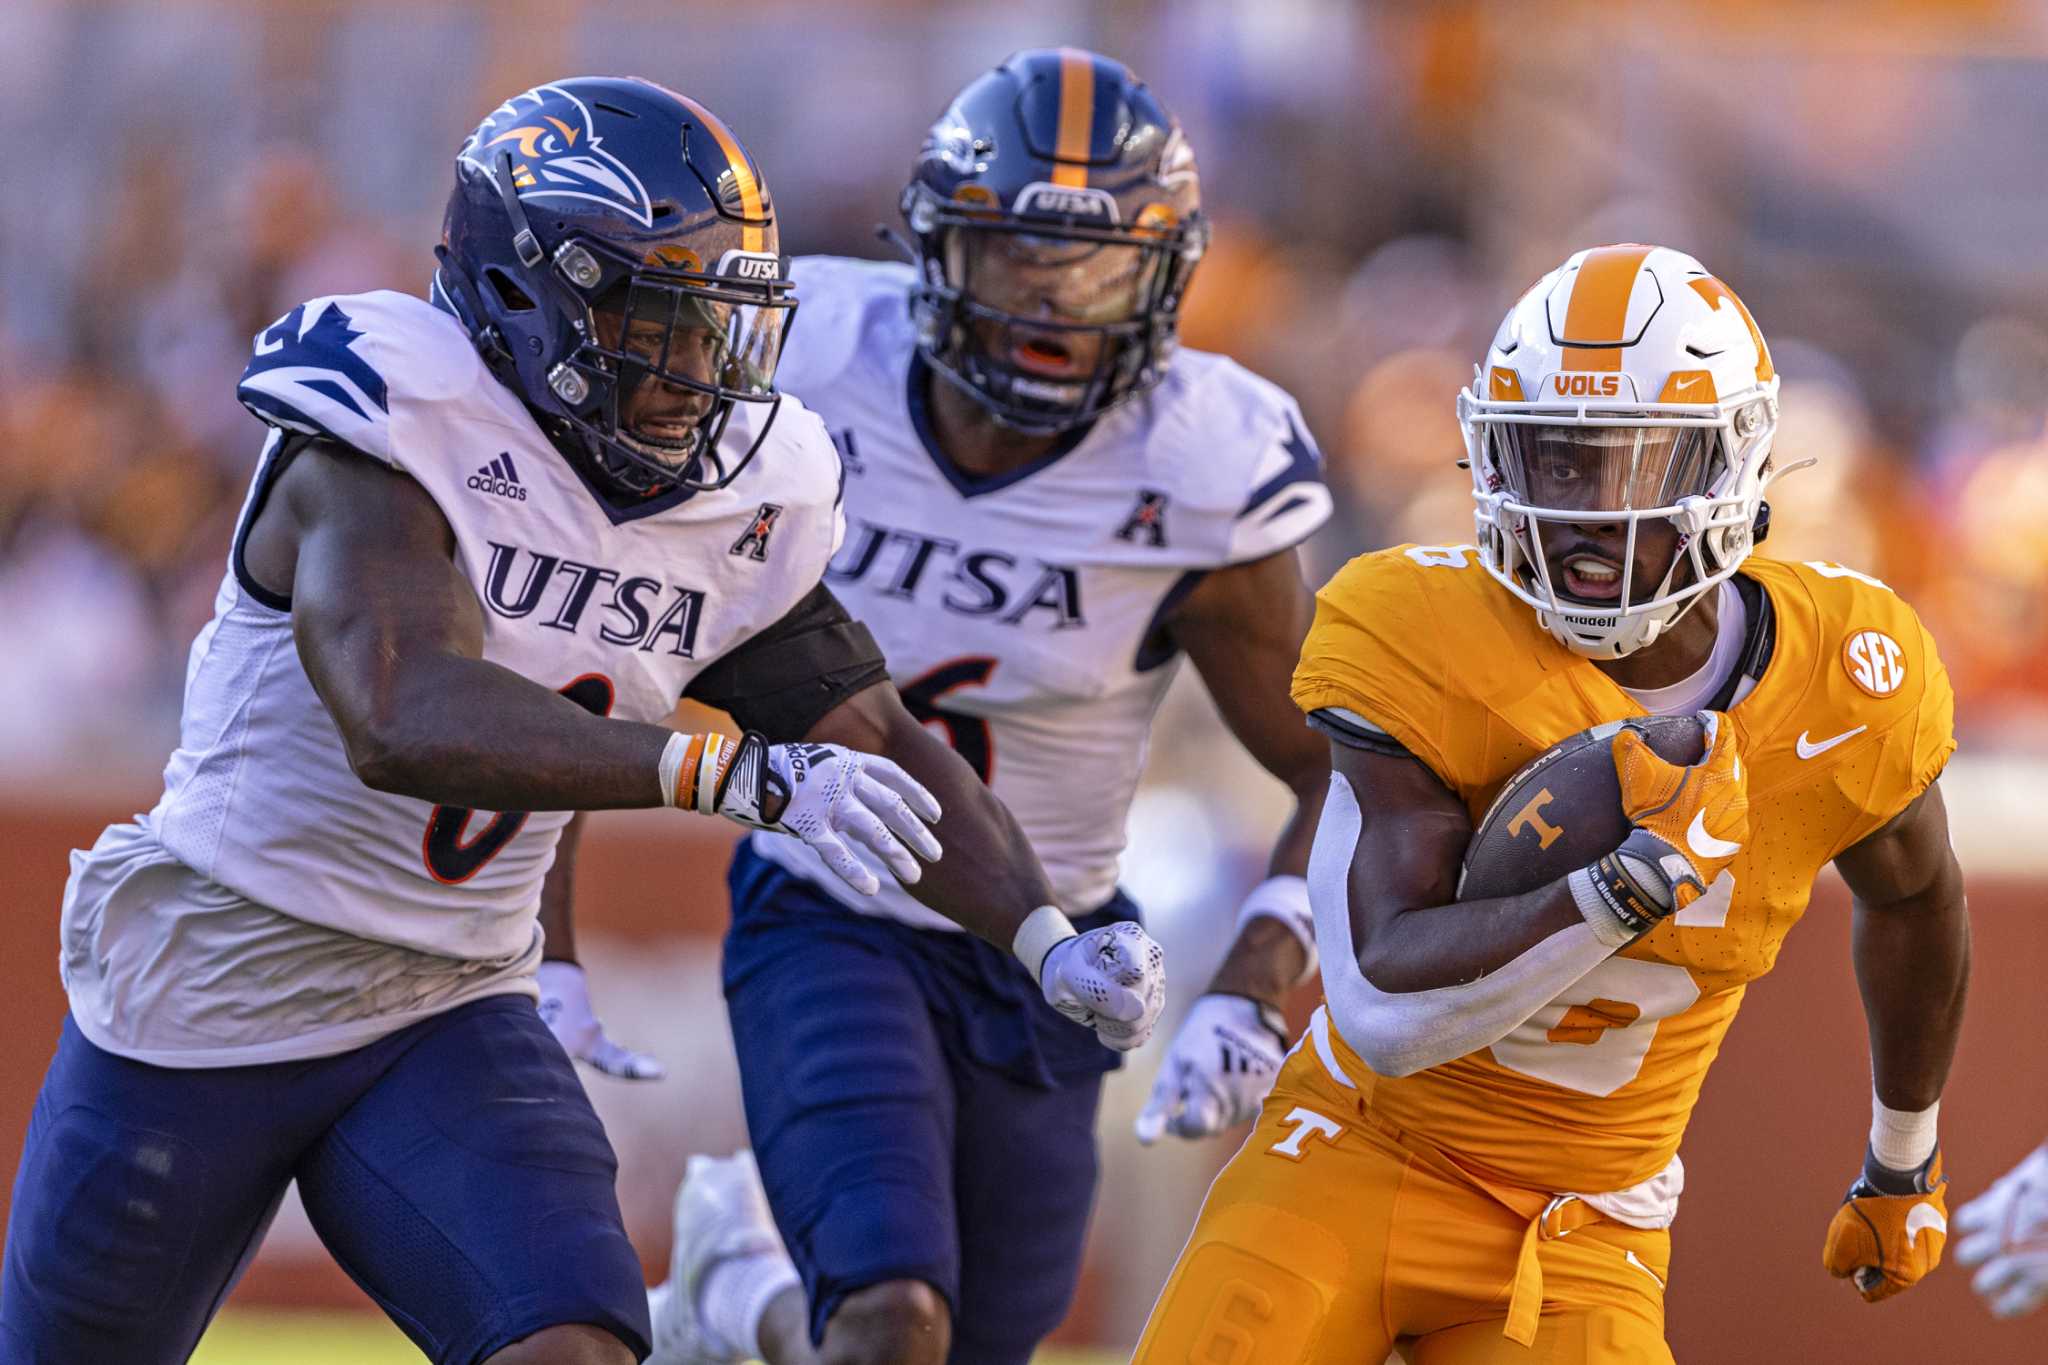 Vols look to make up for previous letdowns with strong start in